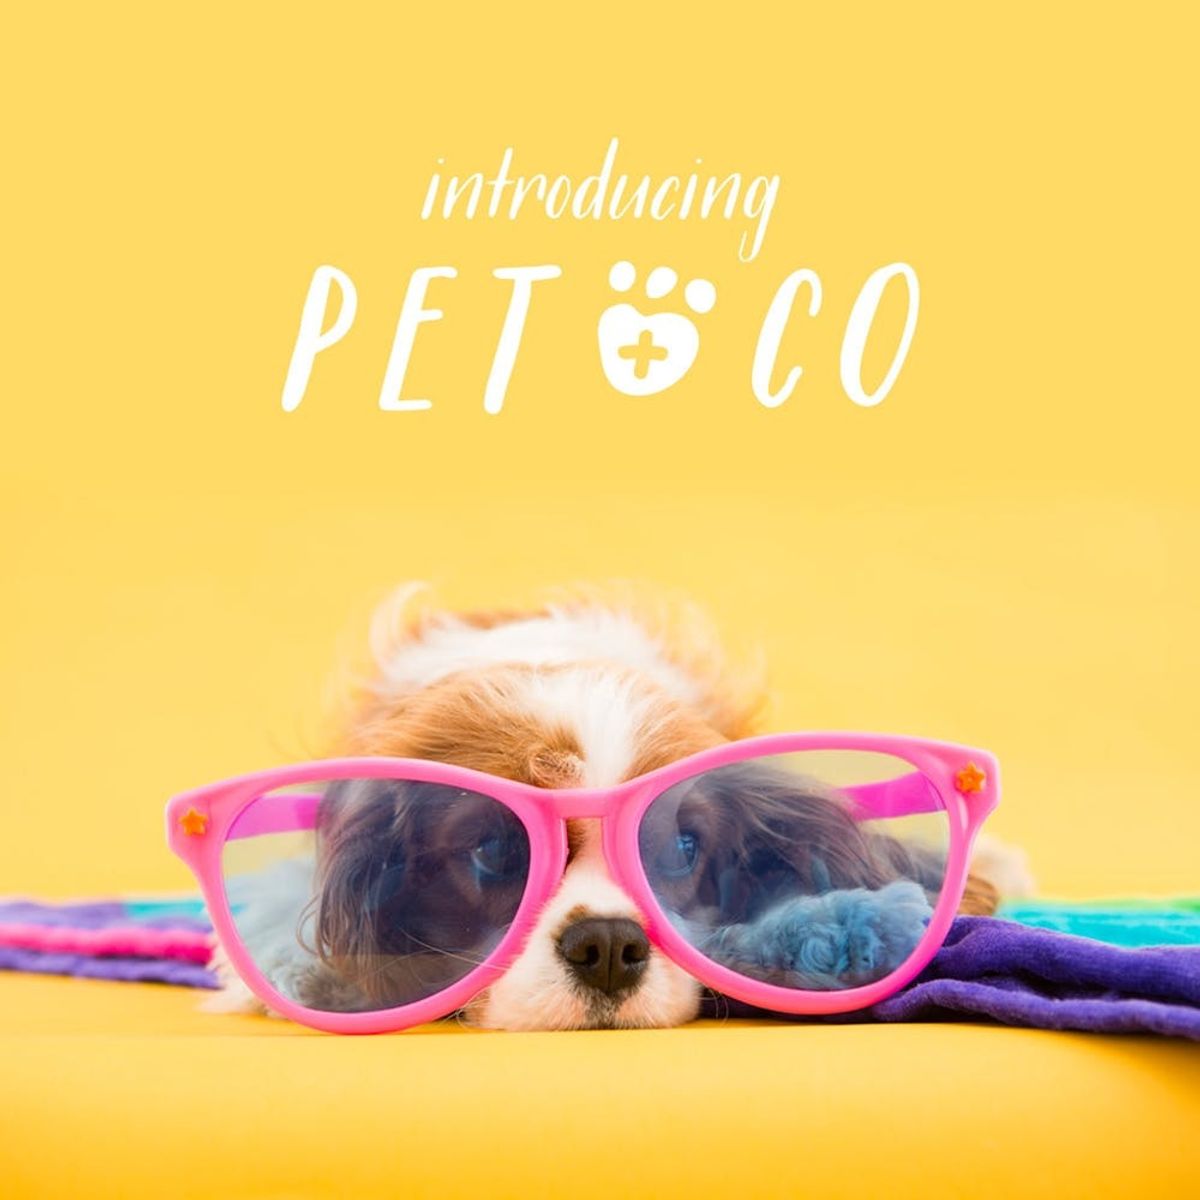 Announcing Our New Site: Pet + Co